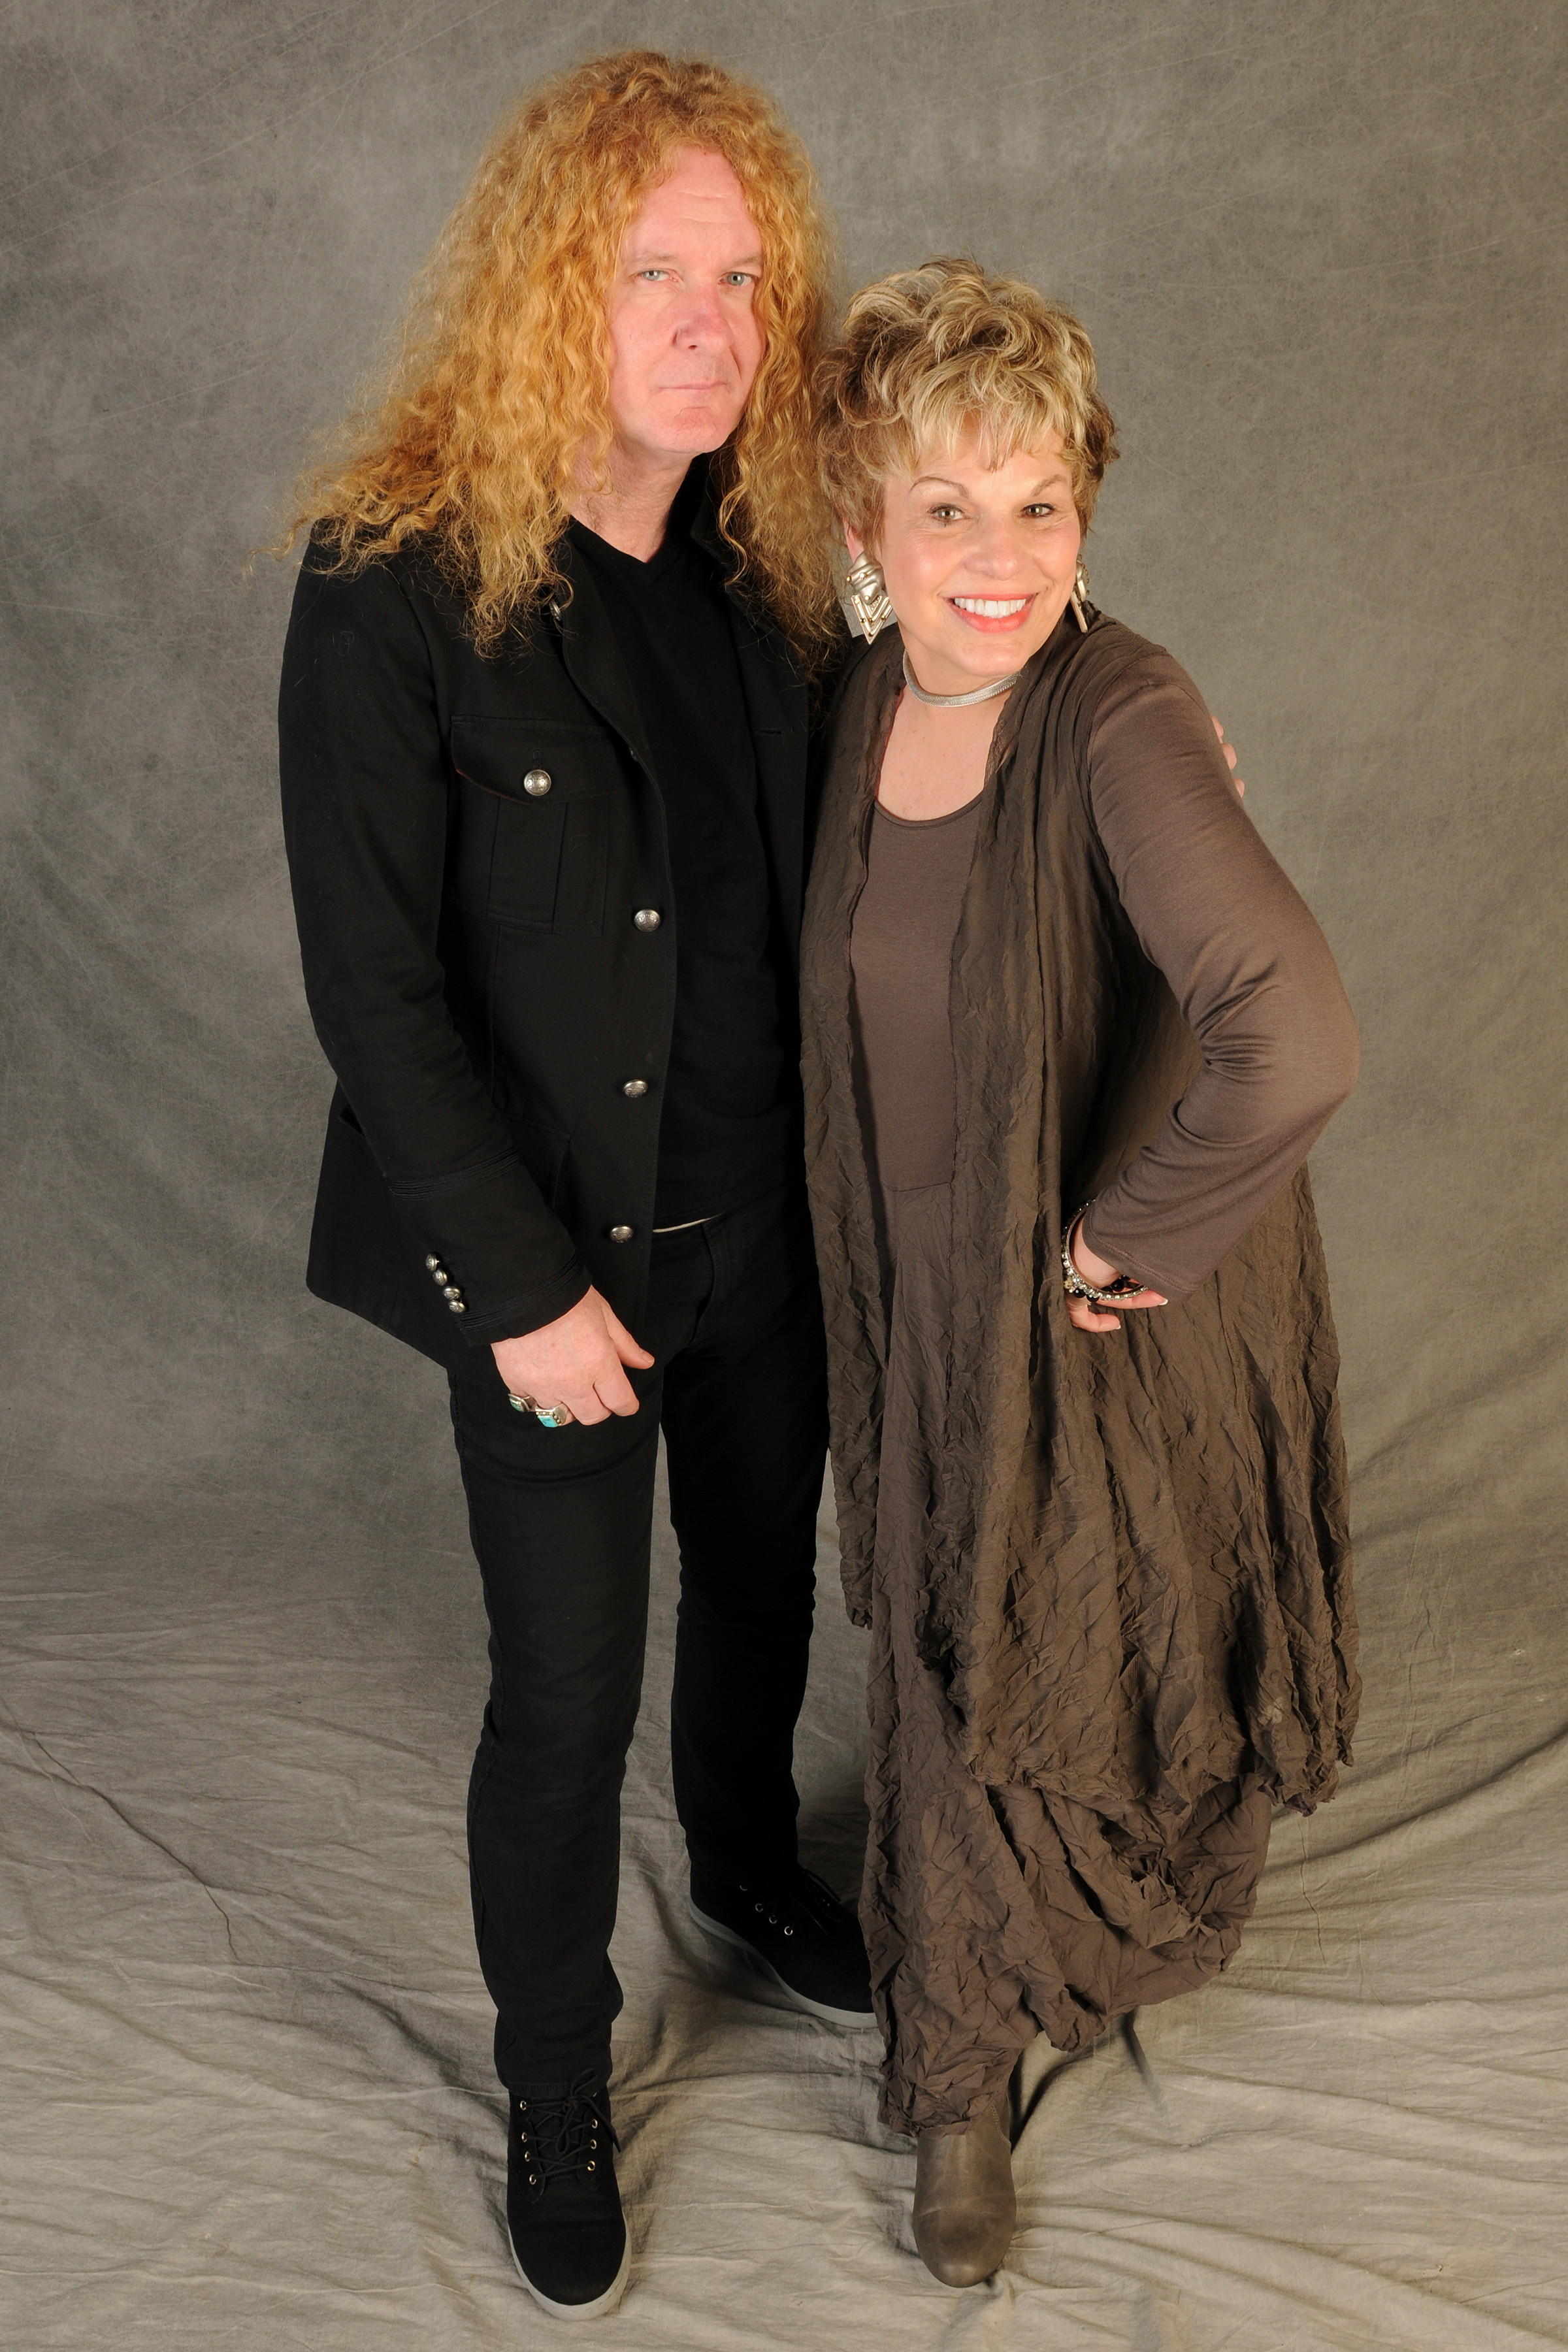 Kathryn Raaker with Rock Star Swan Montgomery for Photo Shoot for Timeless Performer TV show